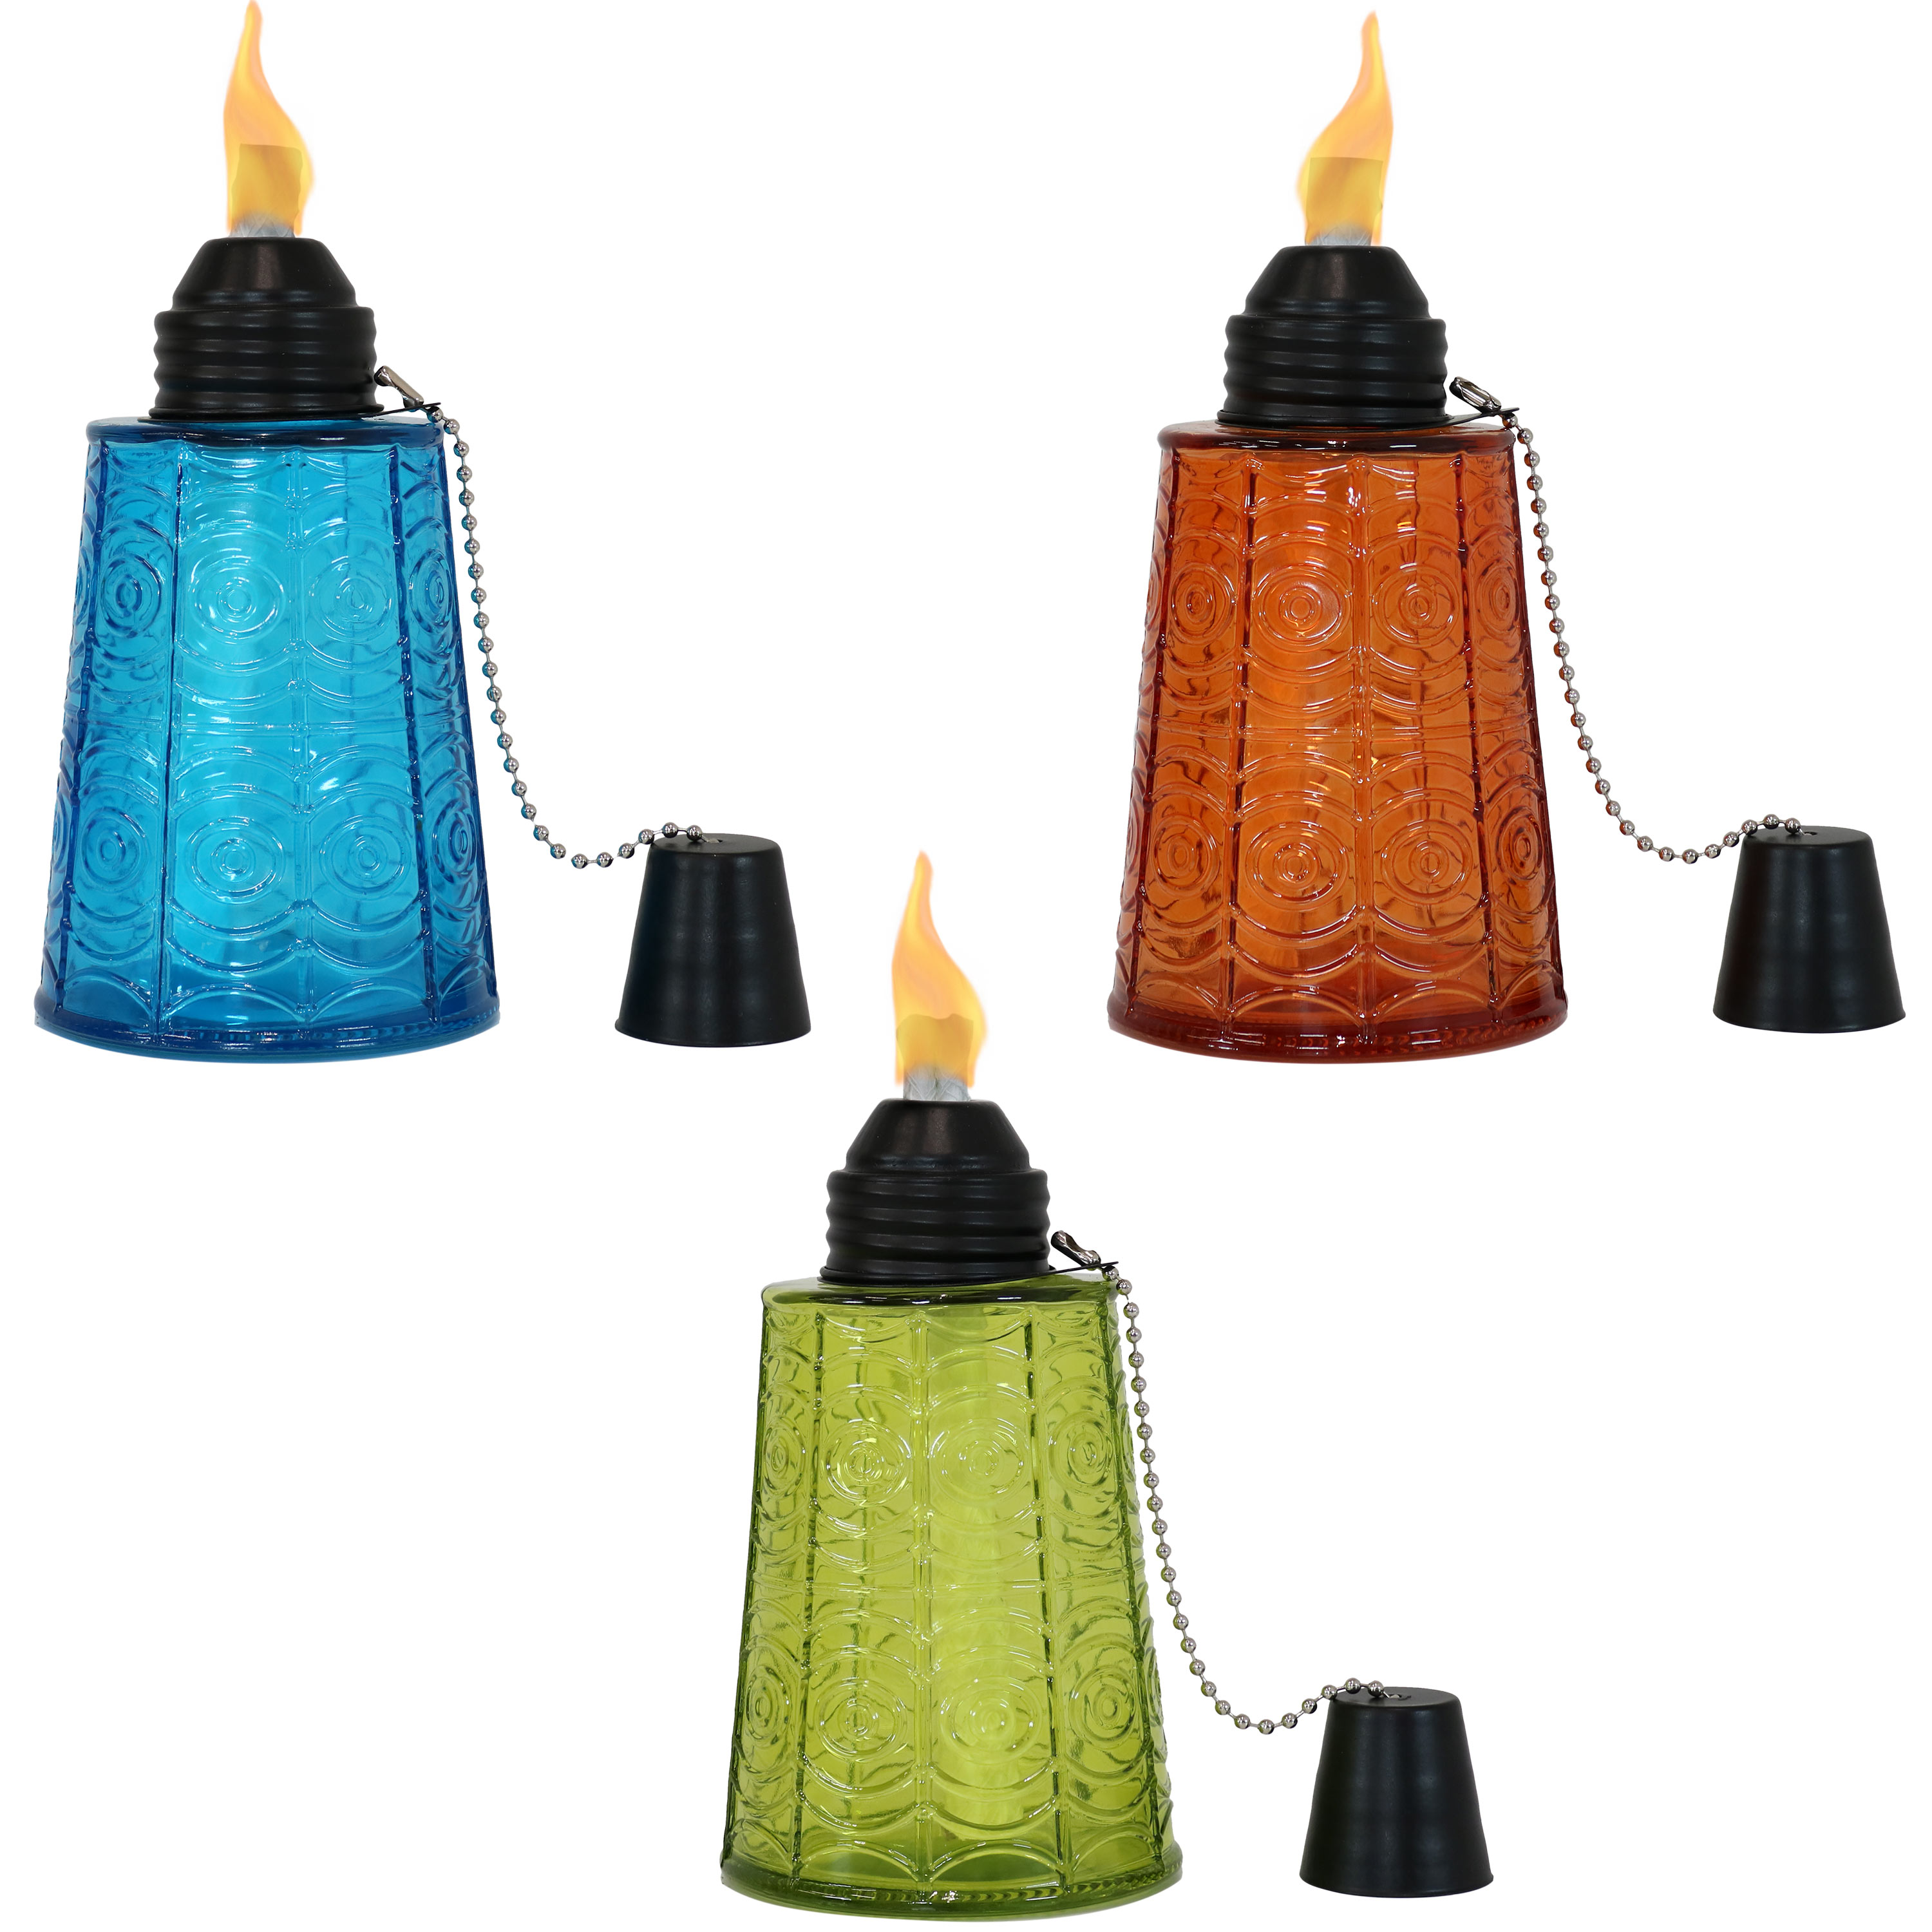 Blue/Orange/Green Glass Textured Tabletop Torch - Set of 3